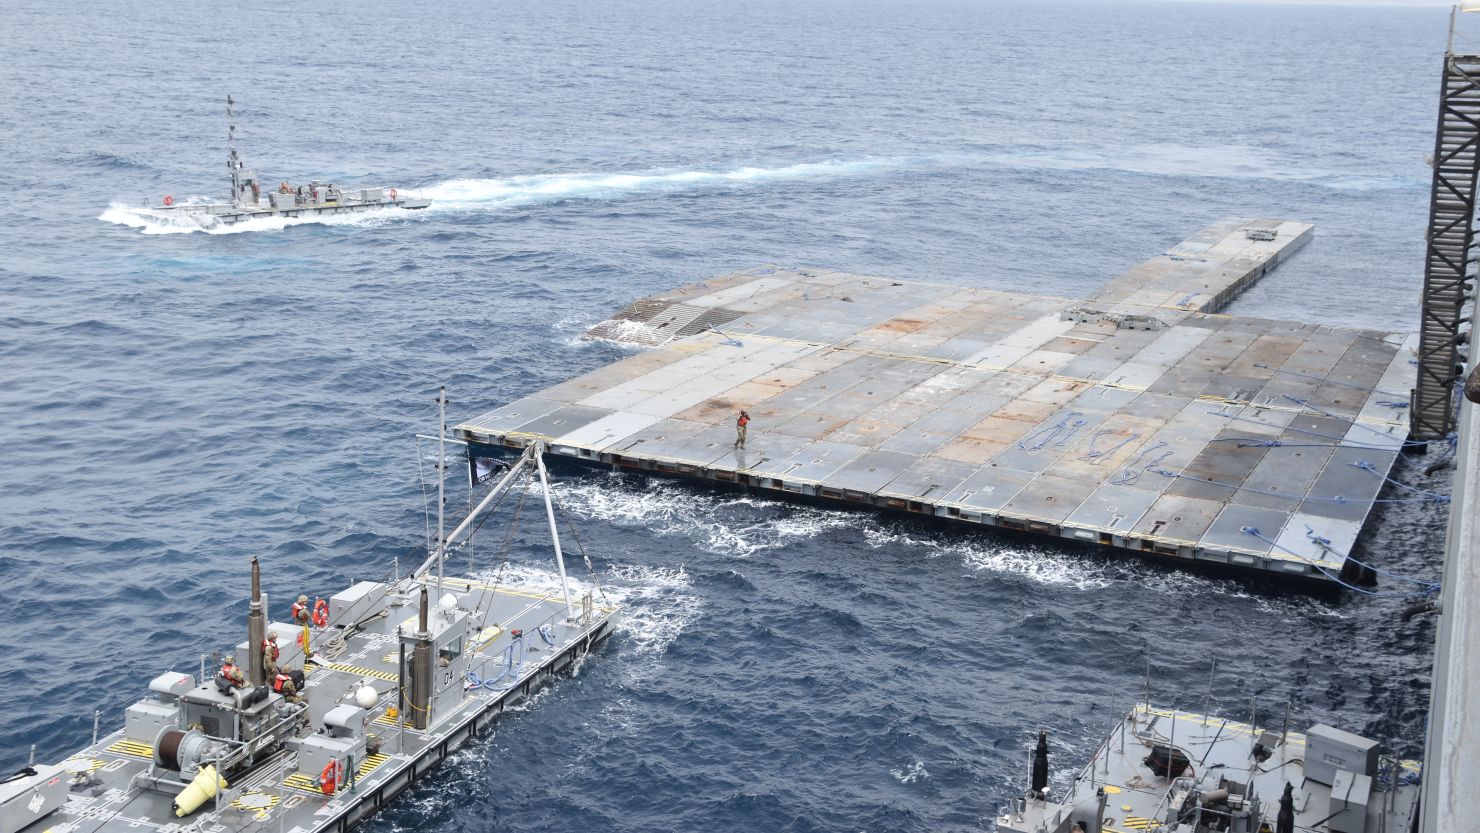 In this image provided by the US Army, soldiers assigned to the 7th Transportation Brigade (Expeditionary) and sailors attached to the M/V Roy P. Benavidez assemble the Roll-On, Roll-Off Distribution Facility (RRDF), or floating pier, off the shore of Gaza in the Mediterranean Sea on April 26, 2024. The pier is part of the Army's Joint Logistics Over The Shore (JLOTS) system which provides critical bridging and water access capabilities.